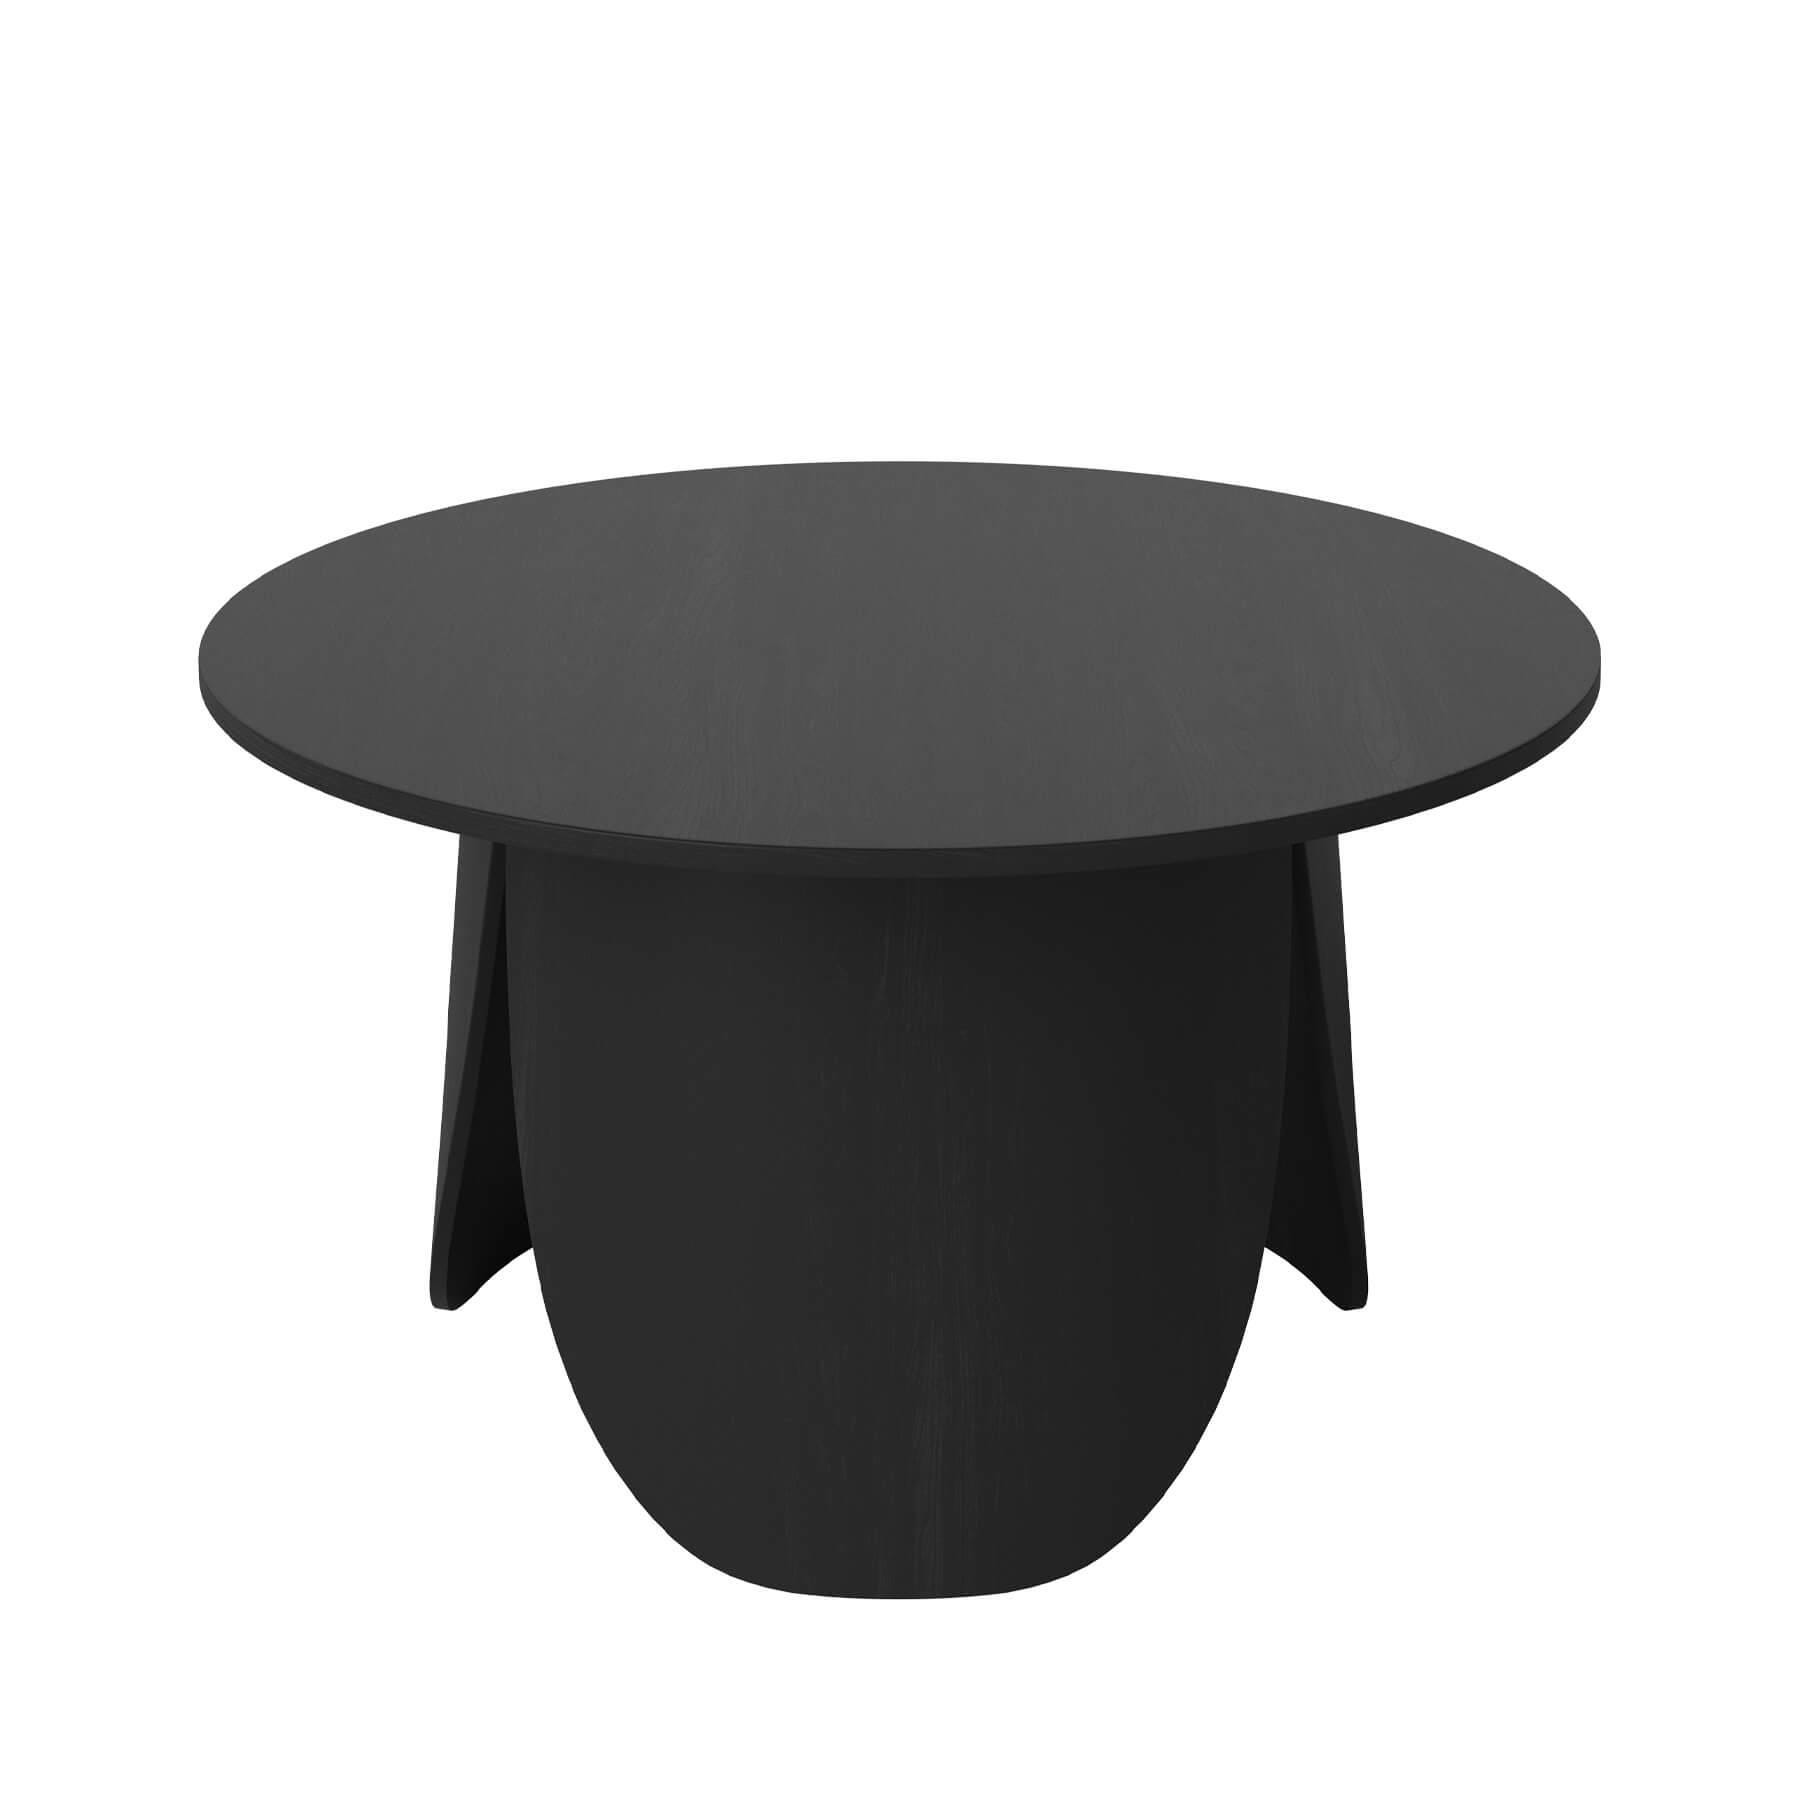 Bolia Peyote Coffee Table Large High Black Stained Lacquer Designer Furniture From Holloways Of Ludlow